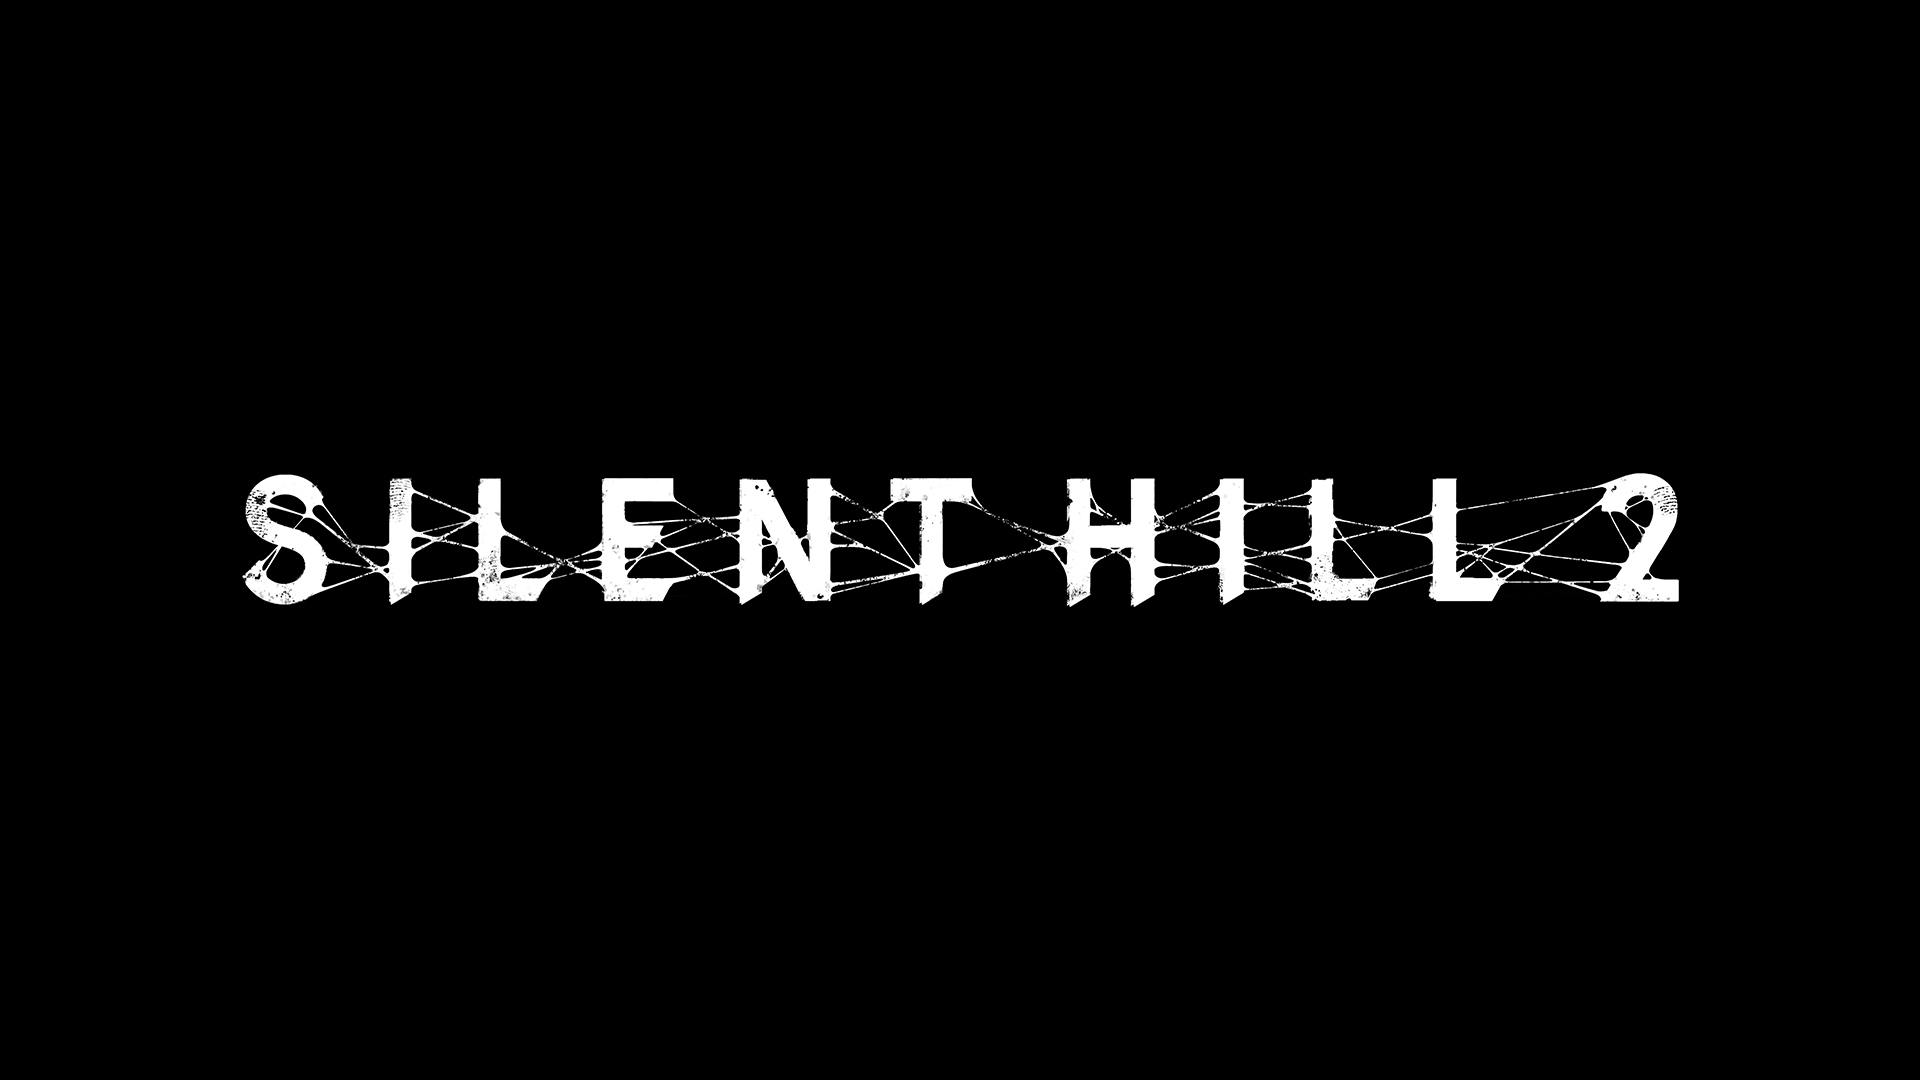 Konami and Bloober Team announce Silent Hill 2 remake for PS5, PC - Gematsu